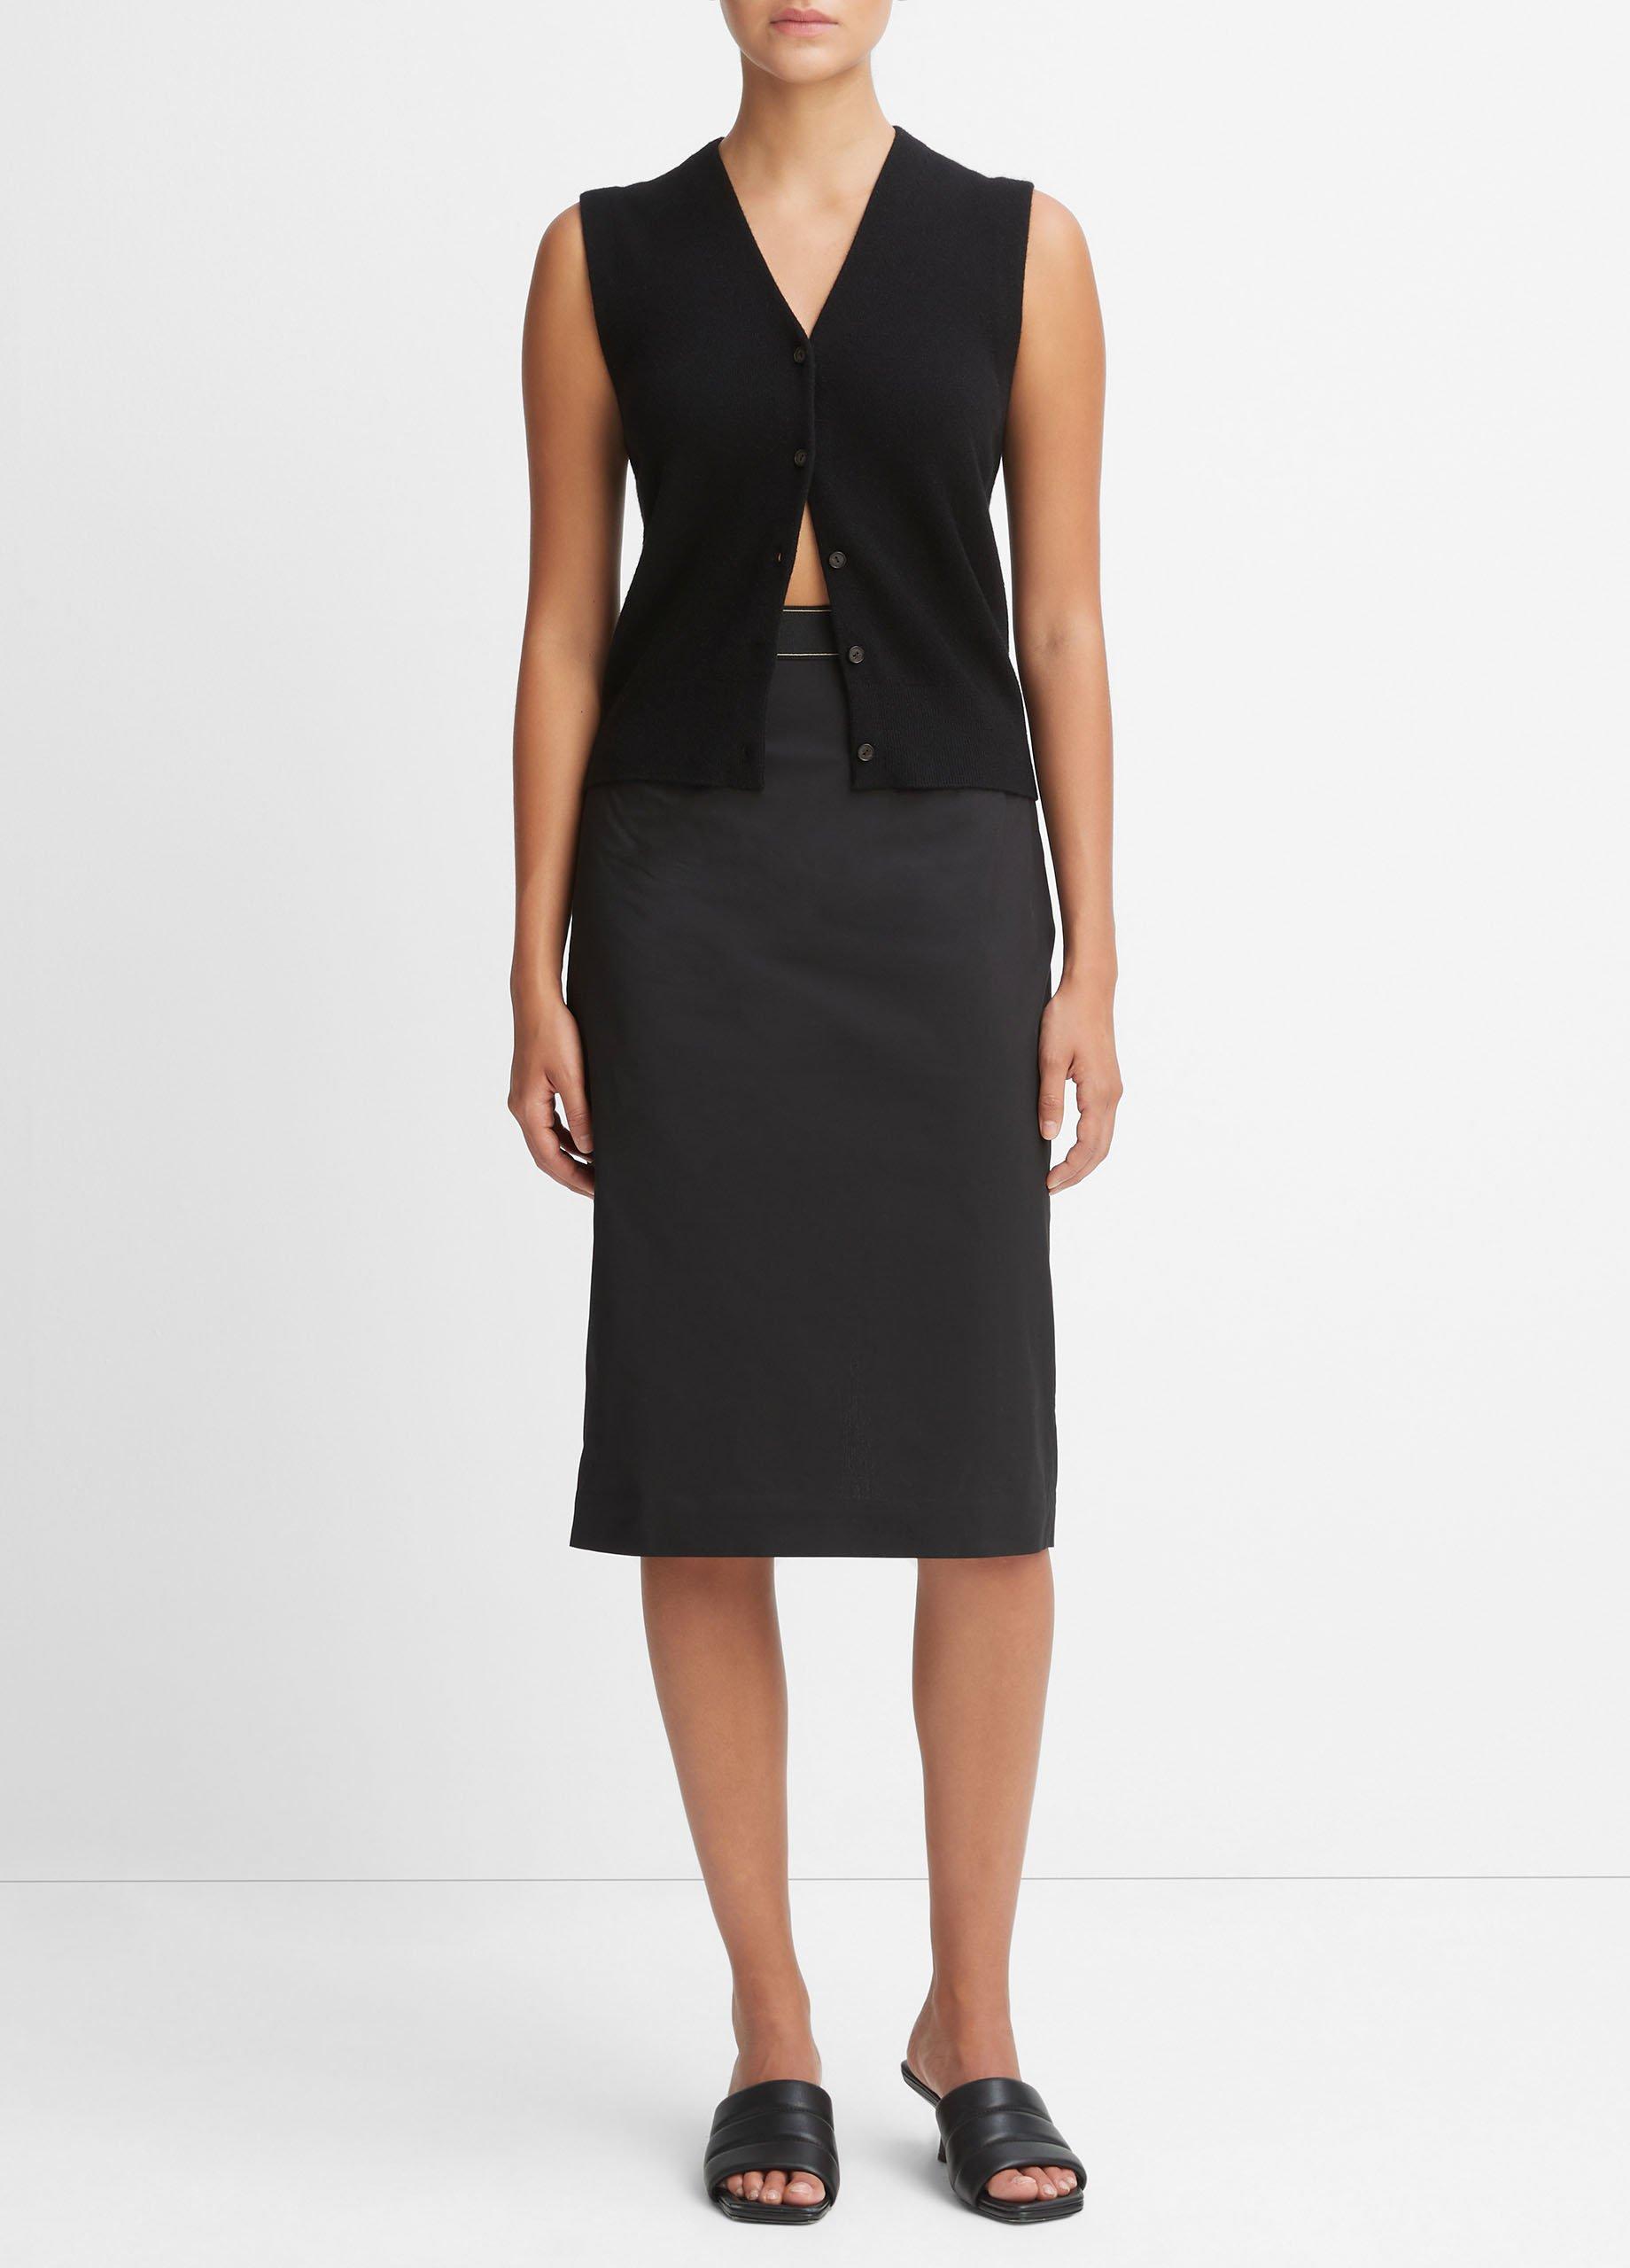 Vince Dresses Skirt Pencil | Skirts Pull-On & in